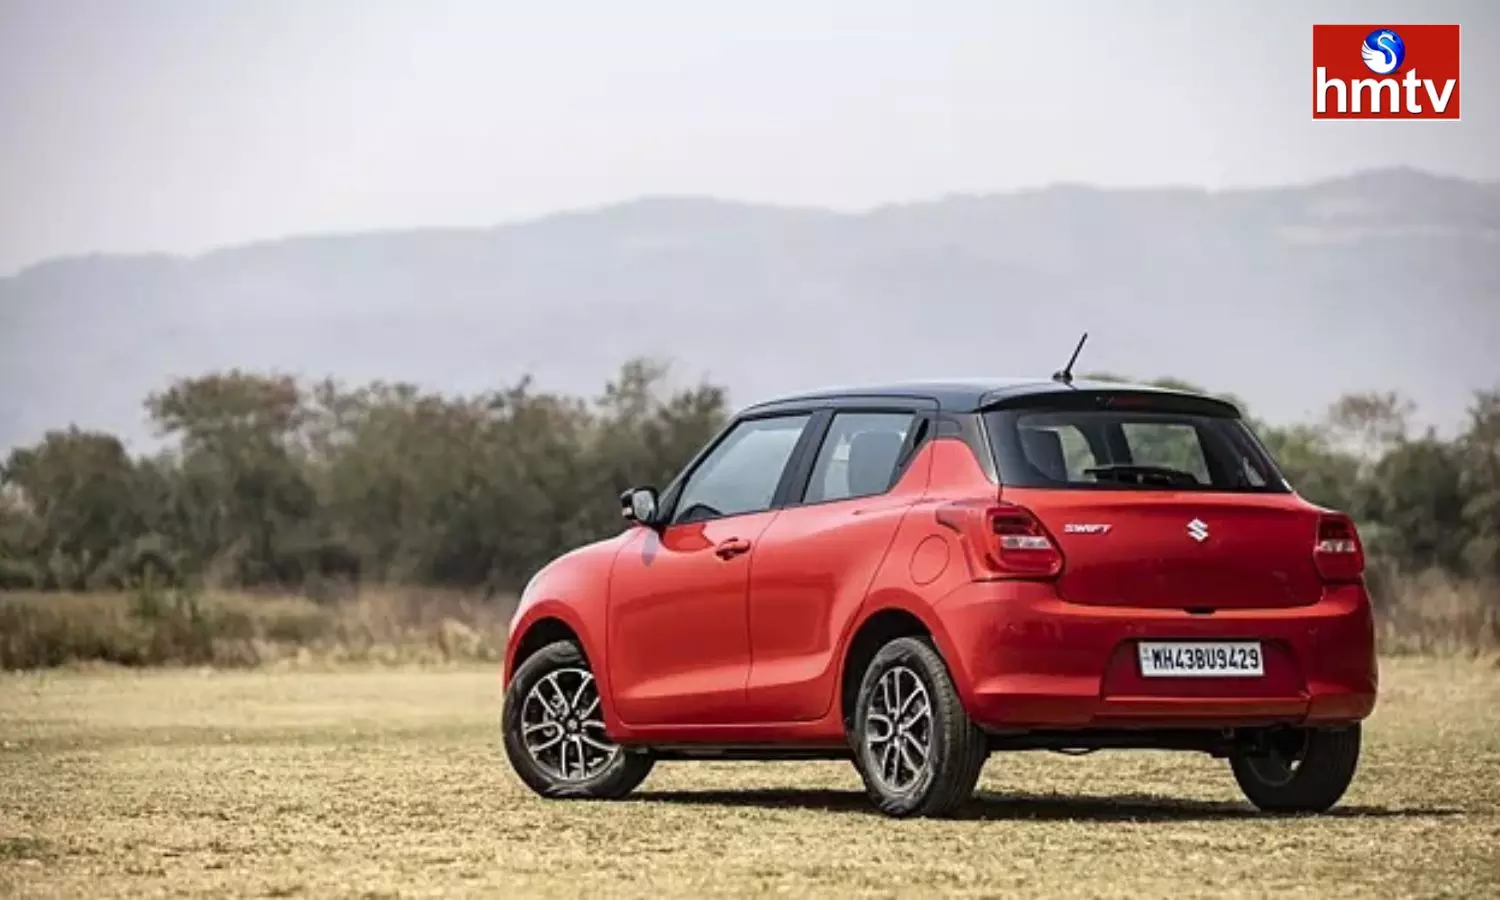 This Is The Cheapest Model Of Maruti Swift, Know What Makes It Special From The Interior To The Exterior